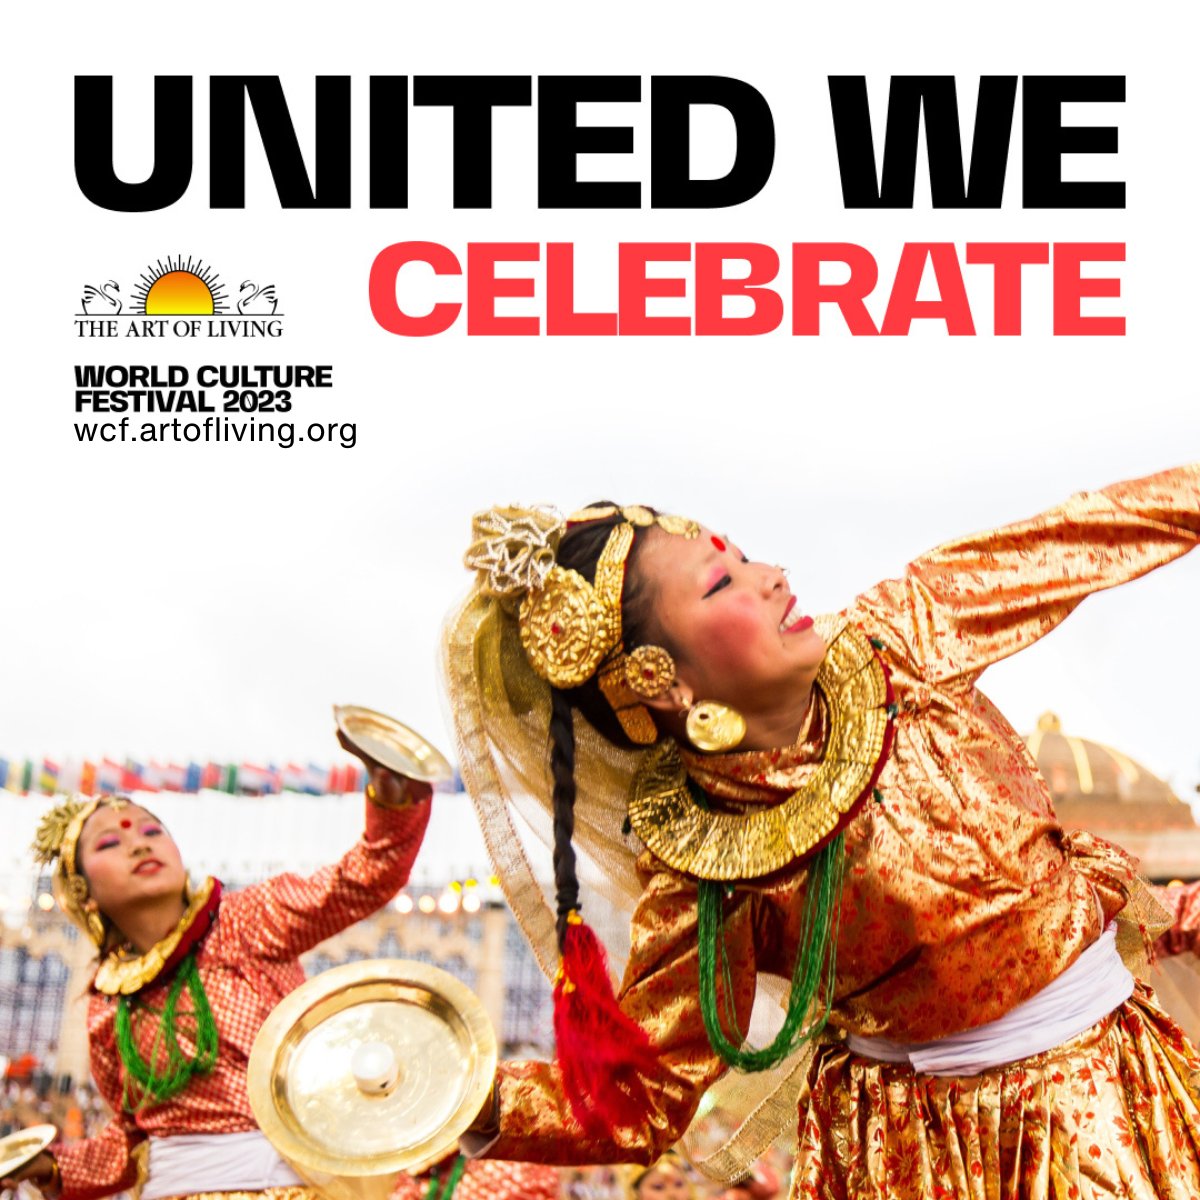 Join 17,000 global artists from all cultural traditions FREE at the World Culture Festival in Washington, DC! Nourish your heart, mind, and body with inspiration, meditation, and food at the National Mall from Sept 29 through Oct 1: wcf.artofliving.org @ArtofLiving